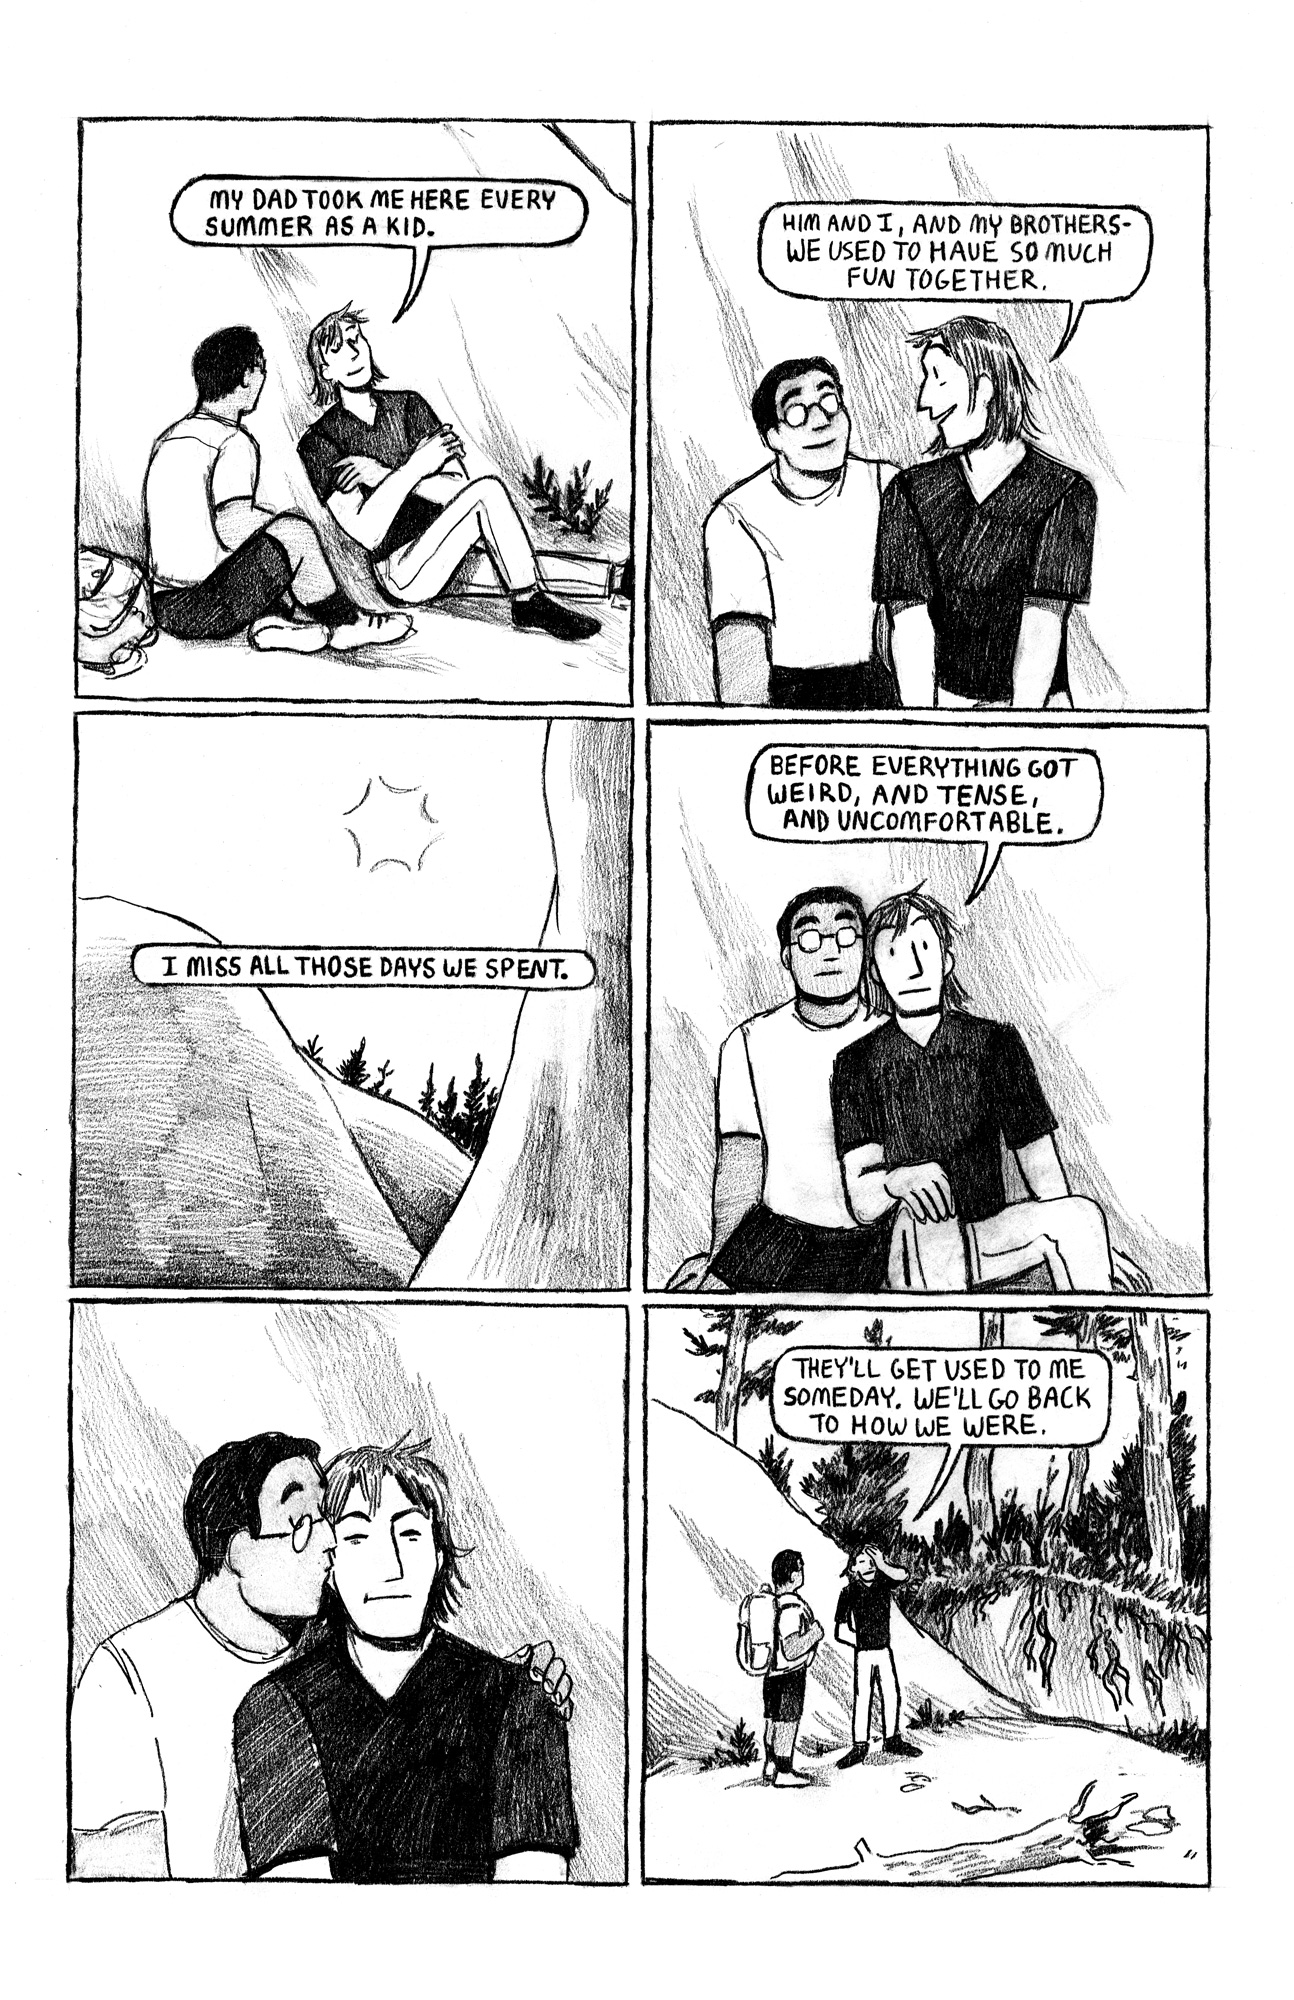 Comic of two men on a date reminiscing